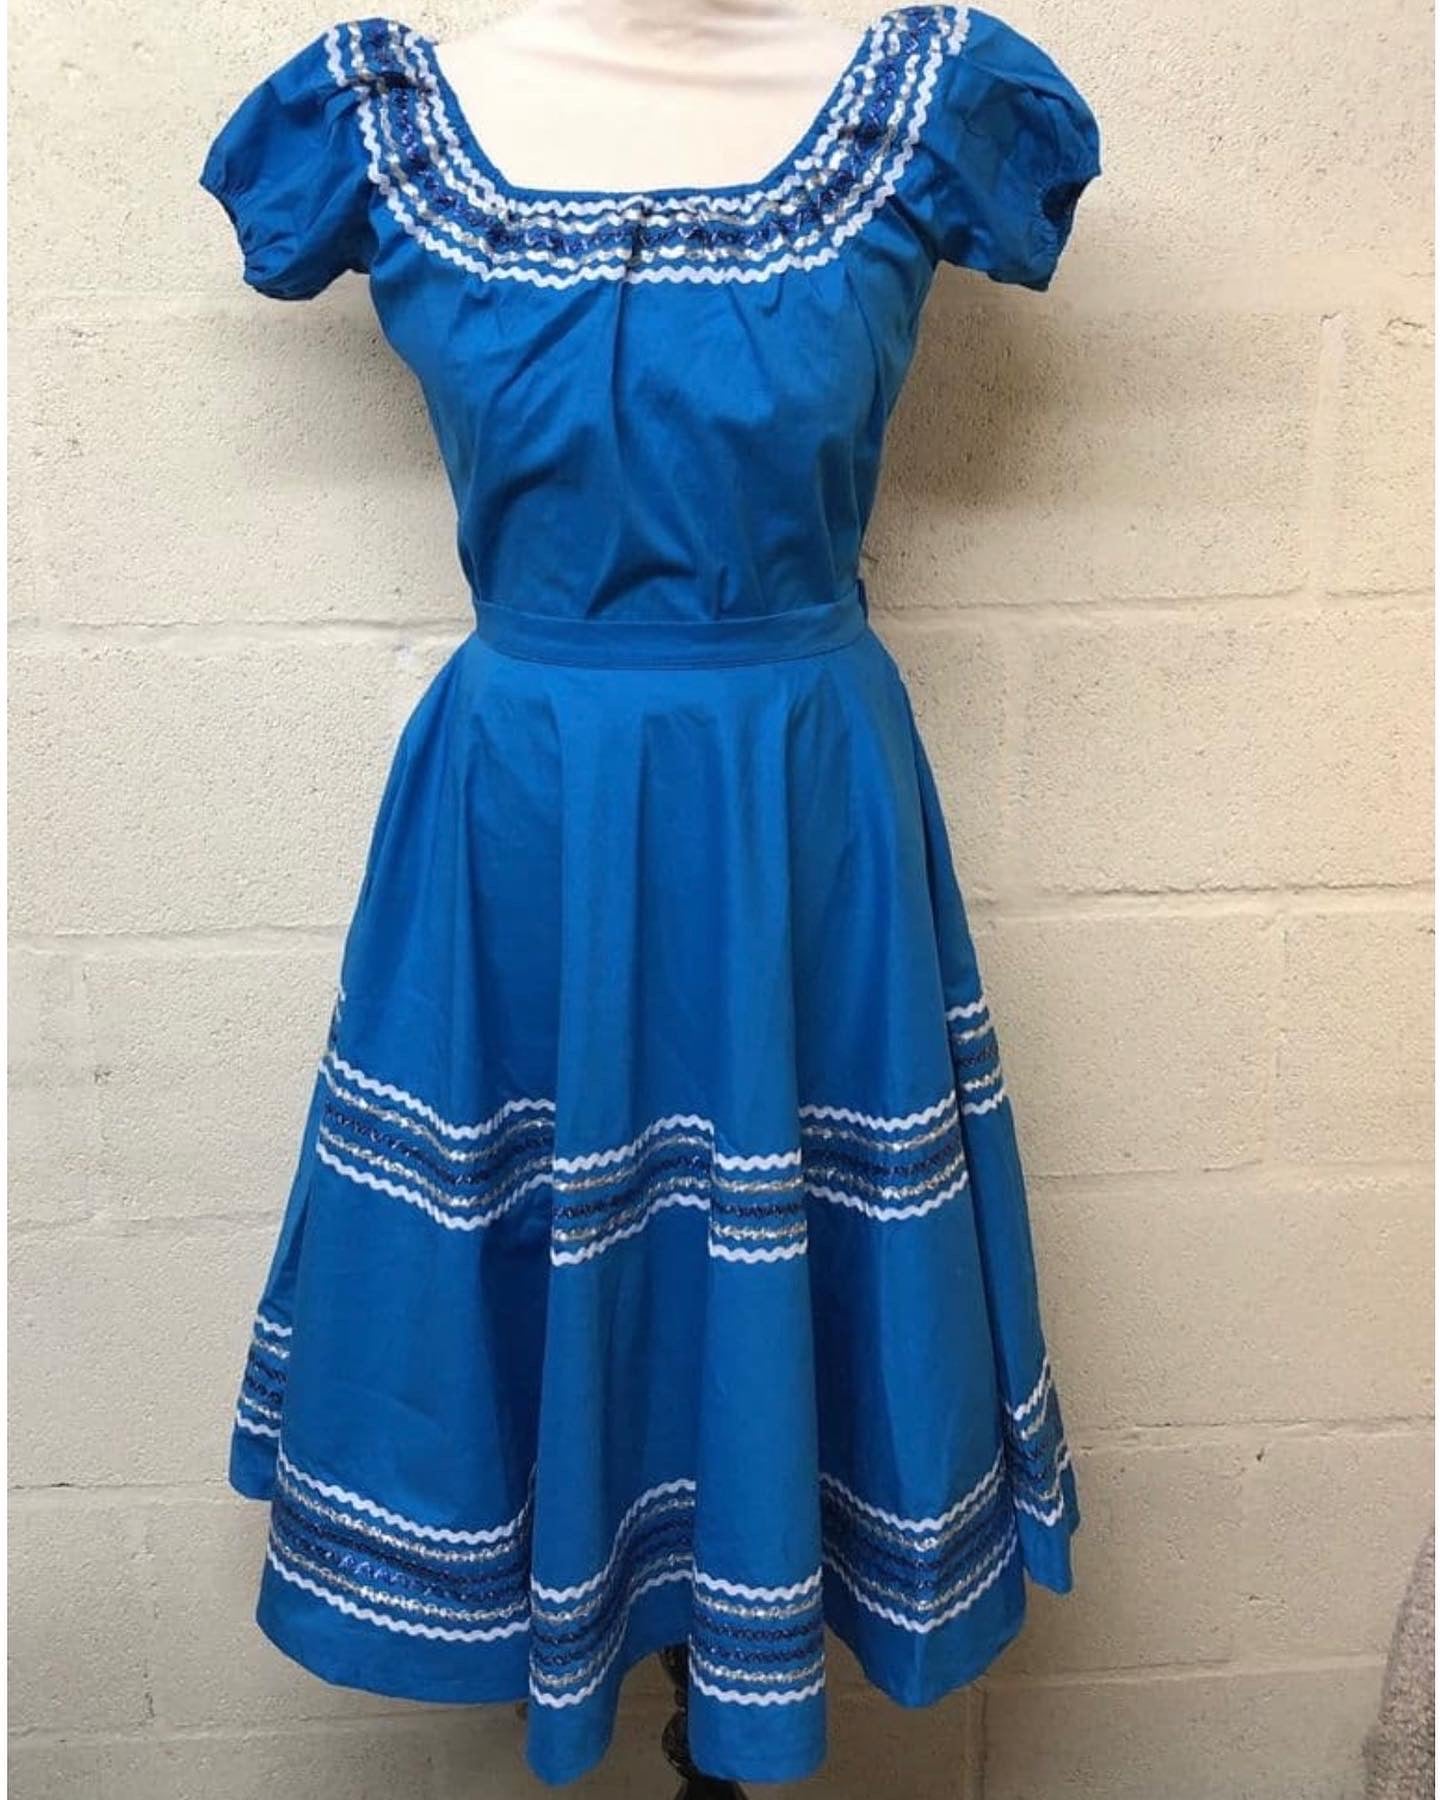 Blue Vintage style Patio skirt and top set M to 4XL